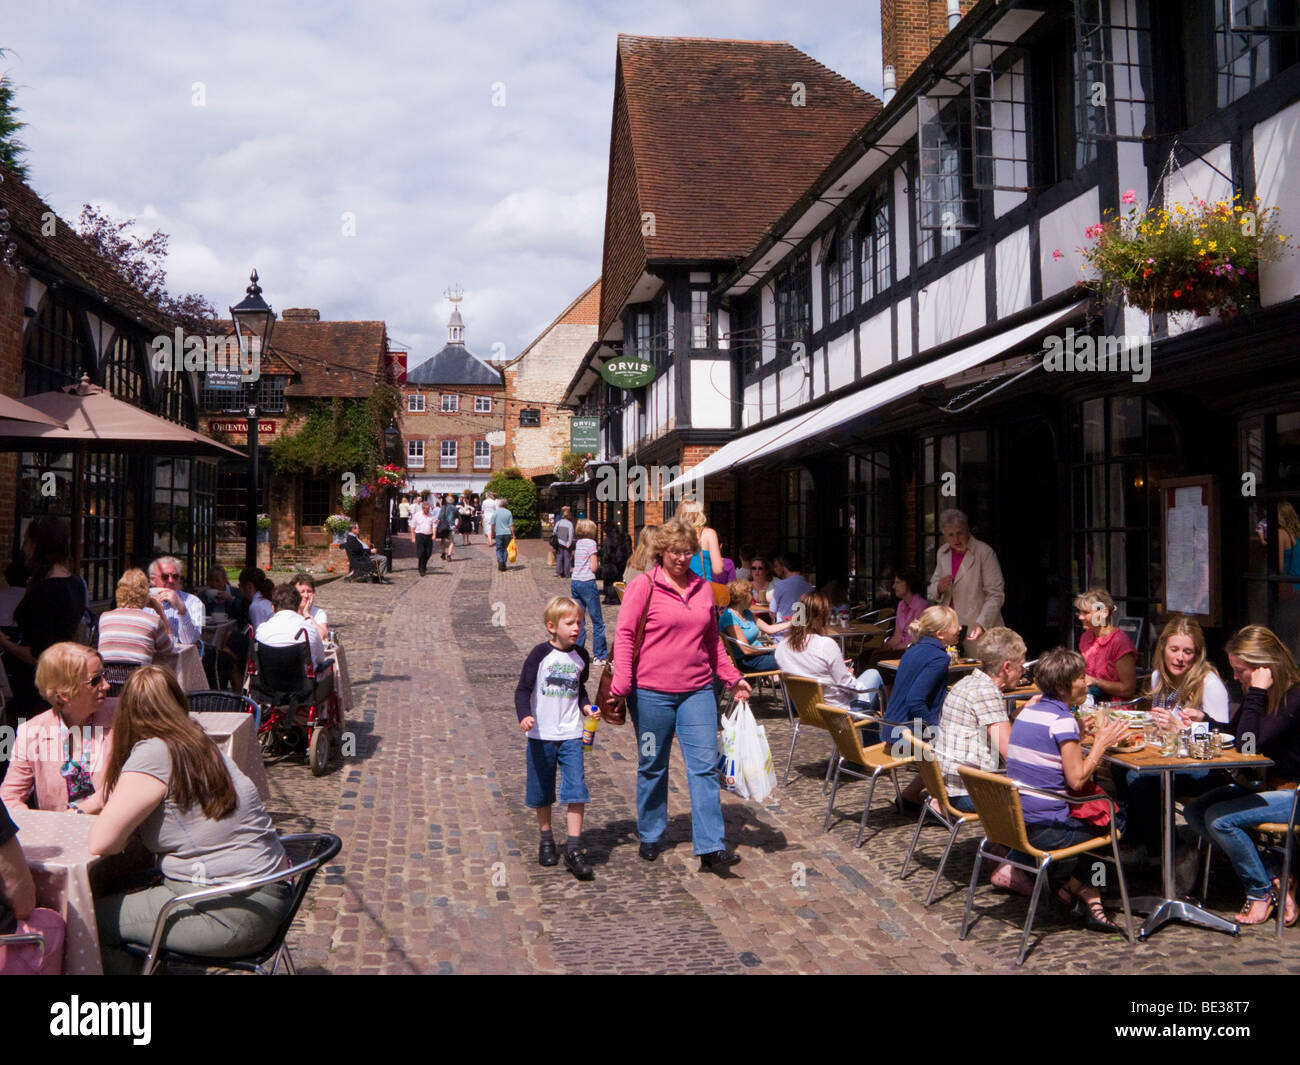 The Lion and Lamb courtyard. Farnham, Surrey. UK. Lion and Lamb cafe is to the right, with people eating at pavement tables. Stock Photo